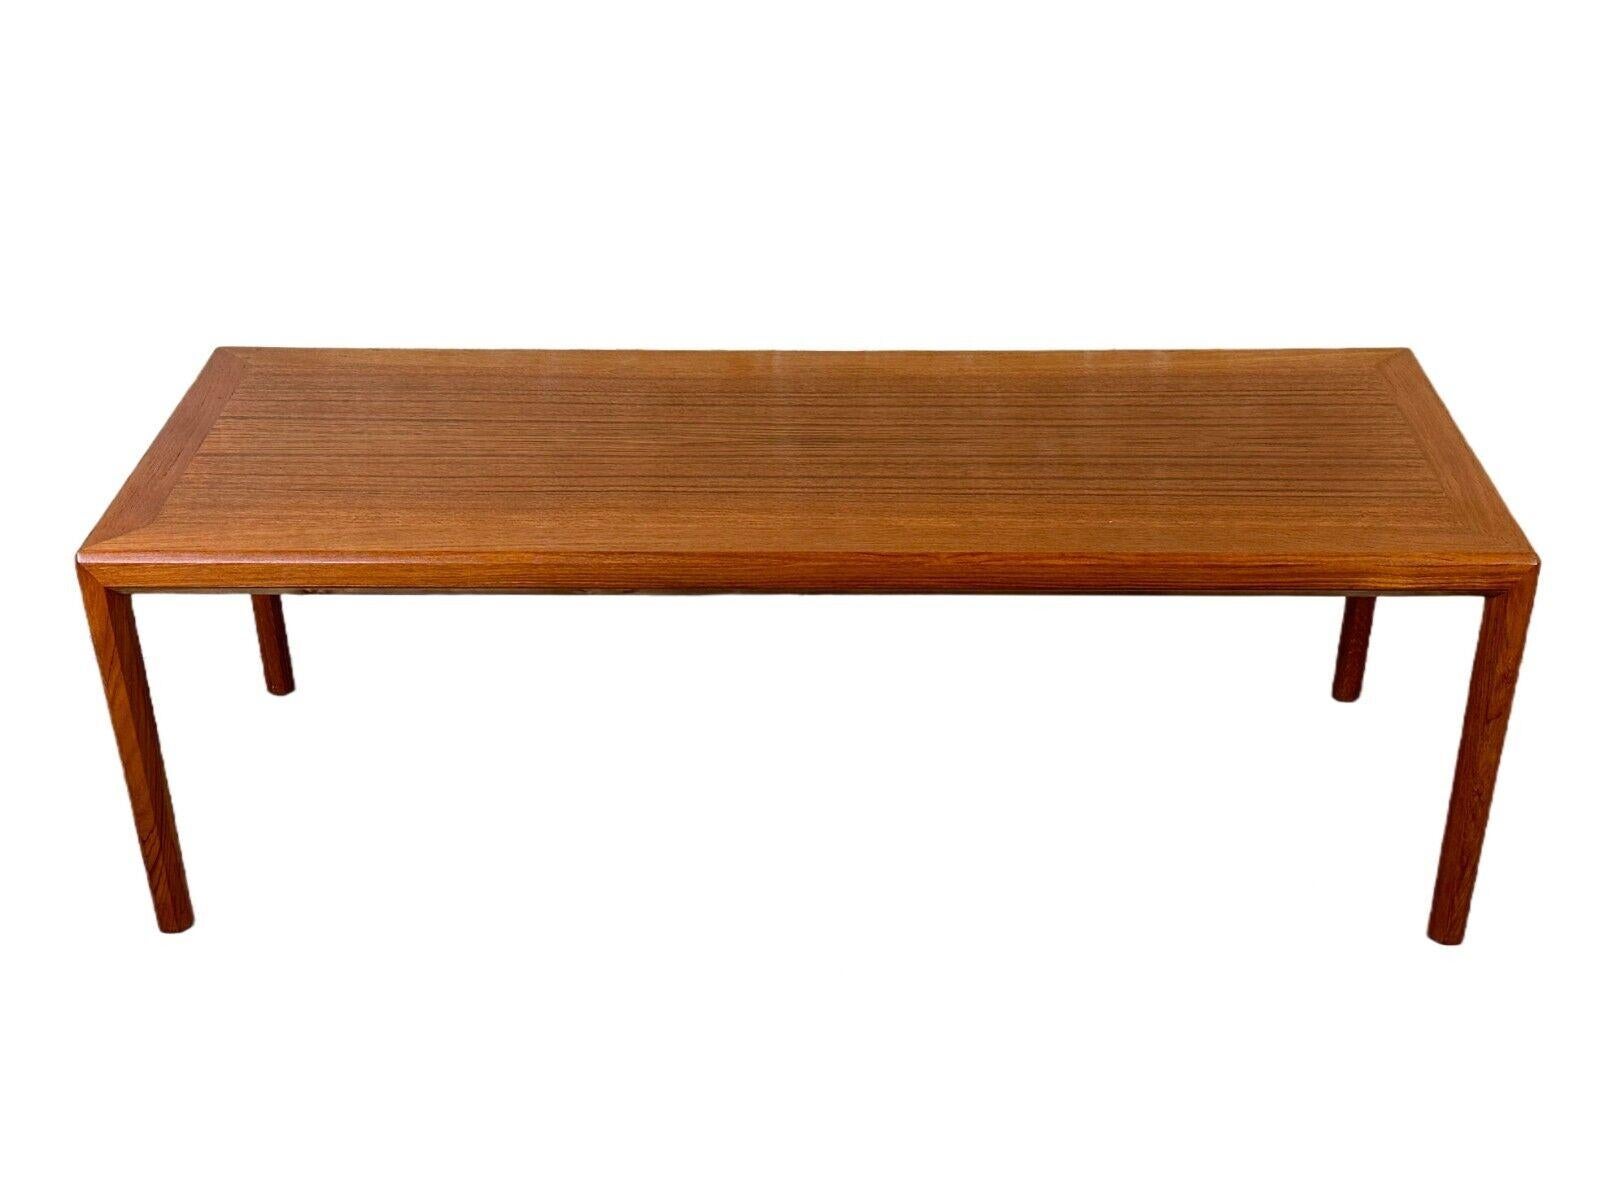 60s 70s teak coffee table side table Bertil Fridhagen Bodafors Sweden

Object: coffee table

Manufacturer: Bodafors

Condition: good

Age: around 1960-1970

Dimensions:

Width = 150.5cm
Depth = 55.5cm
Height = 50.5cm

Material: teak

Other